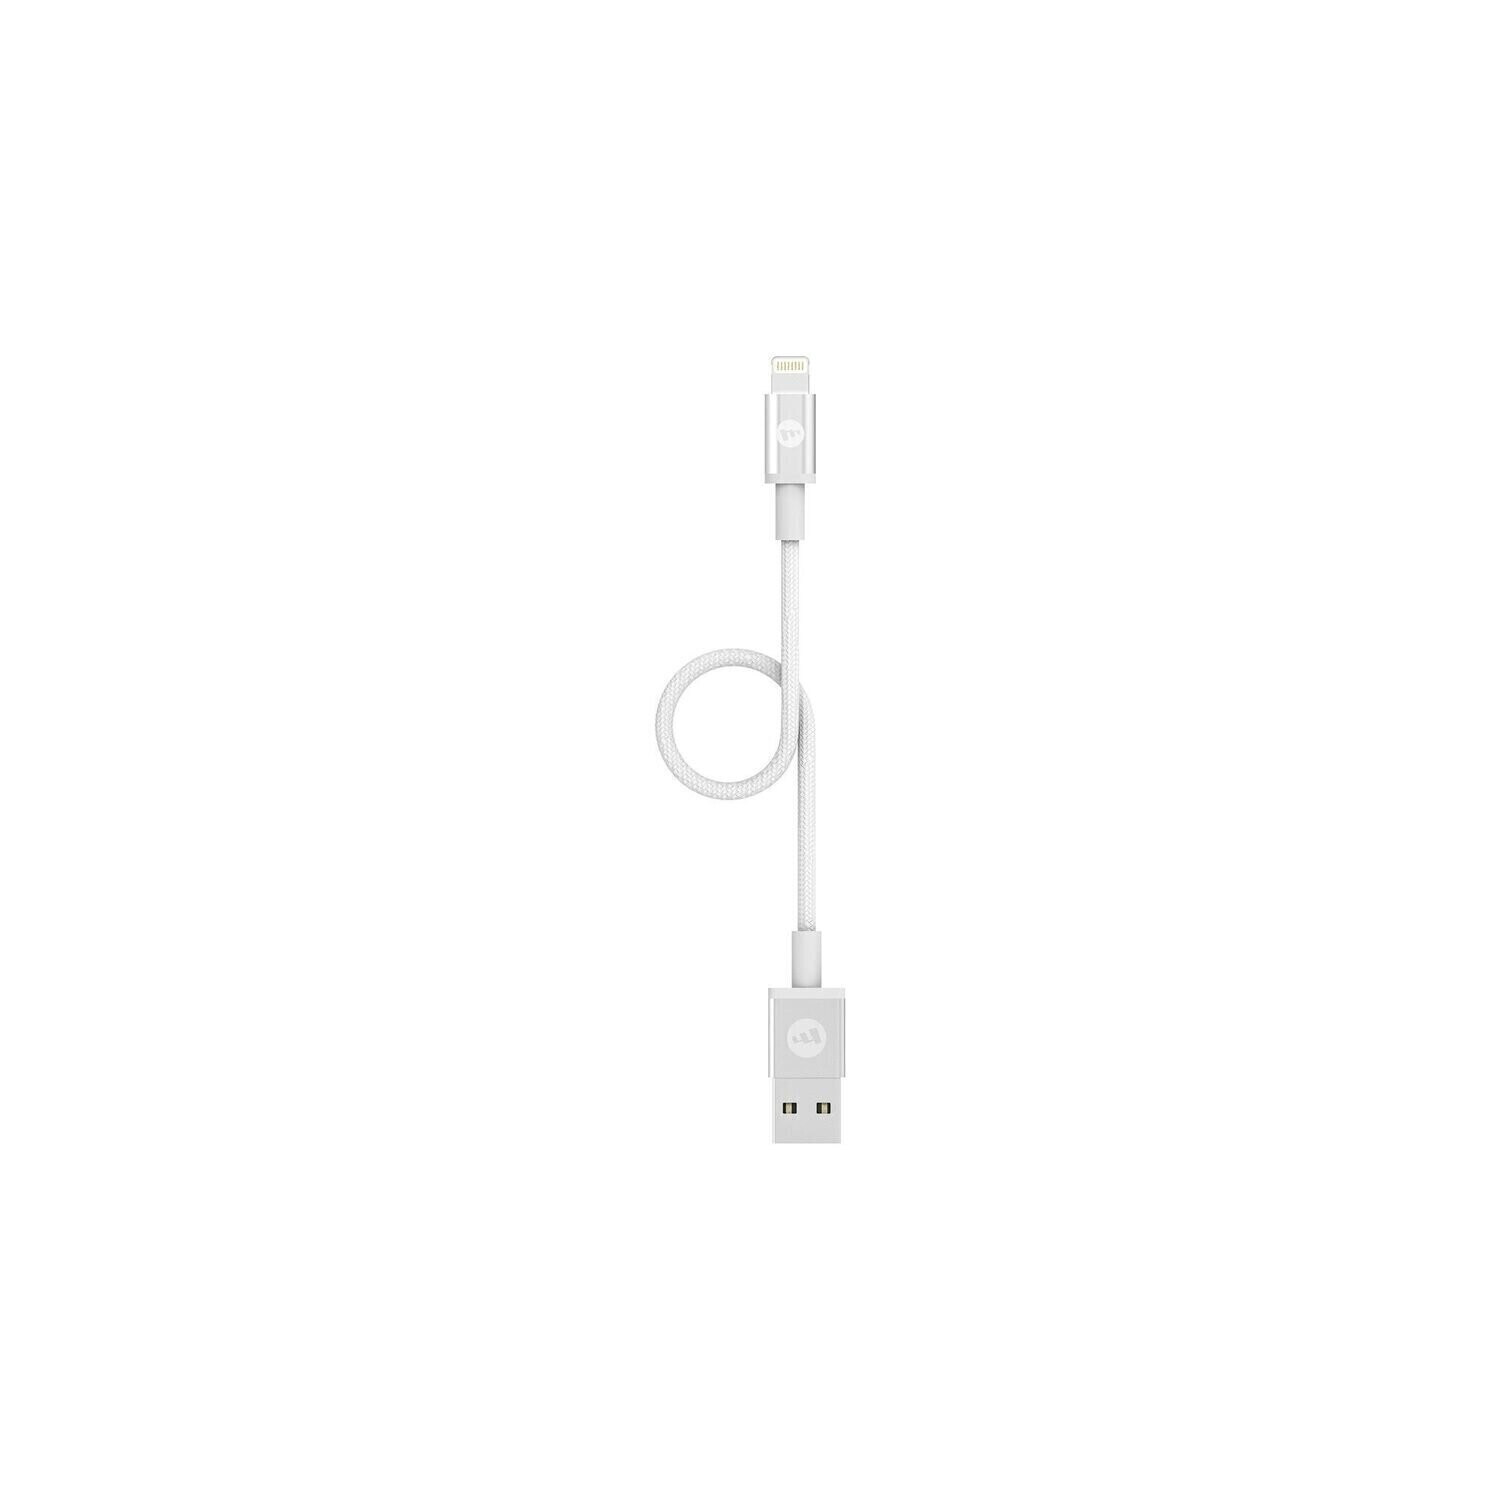 Mophie Cable USB-A to Lightning (9 CM), White